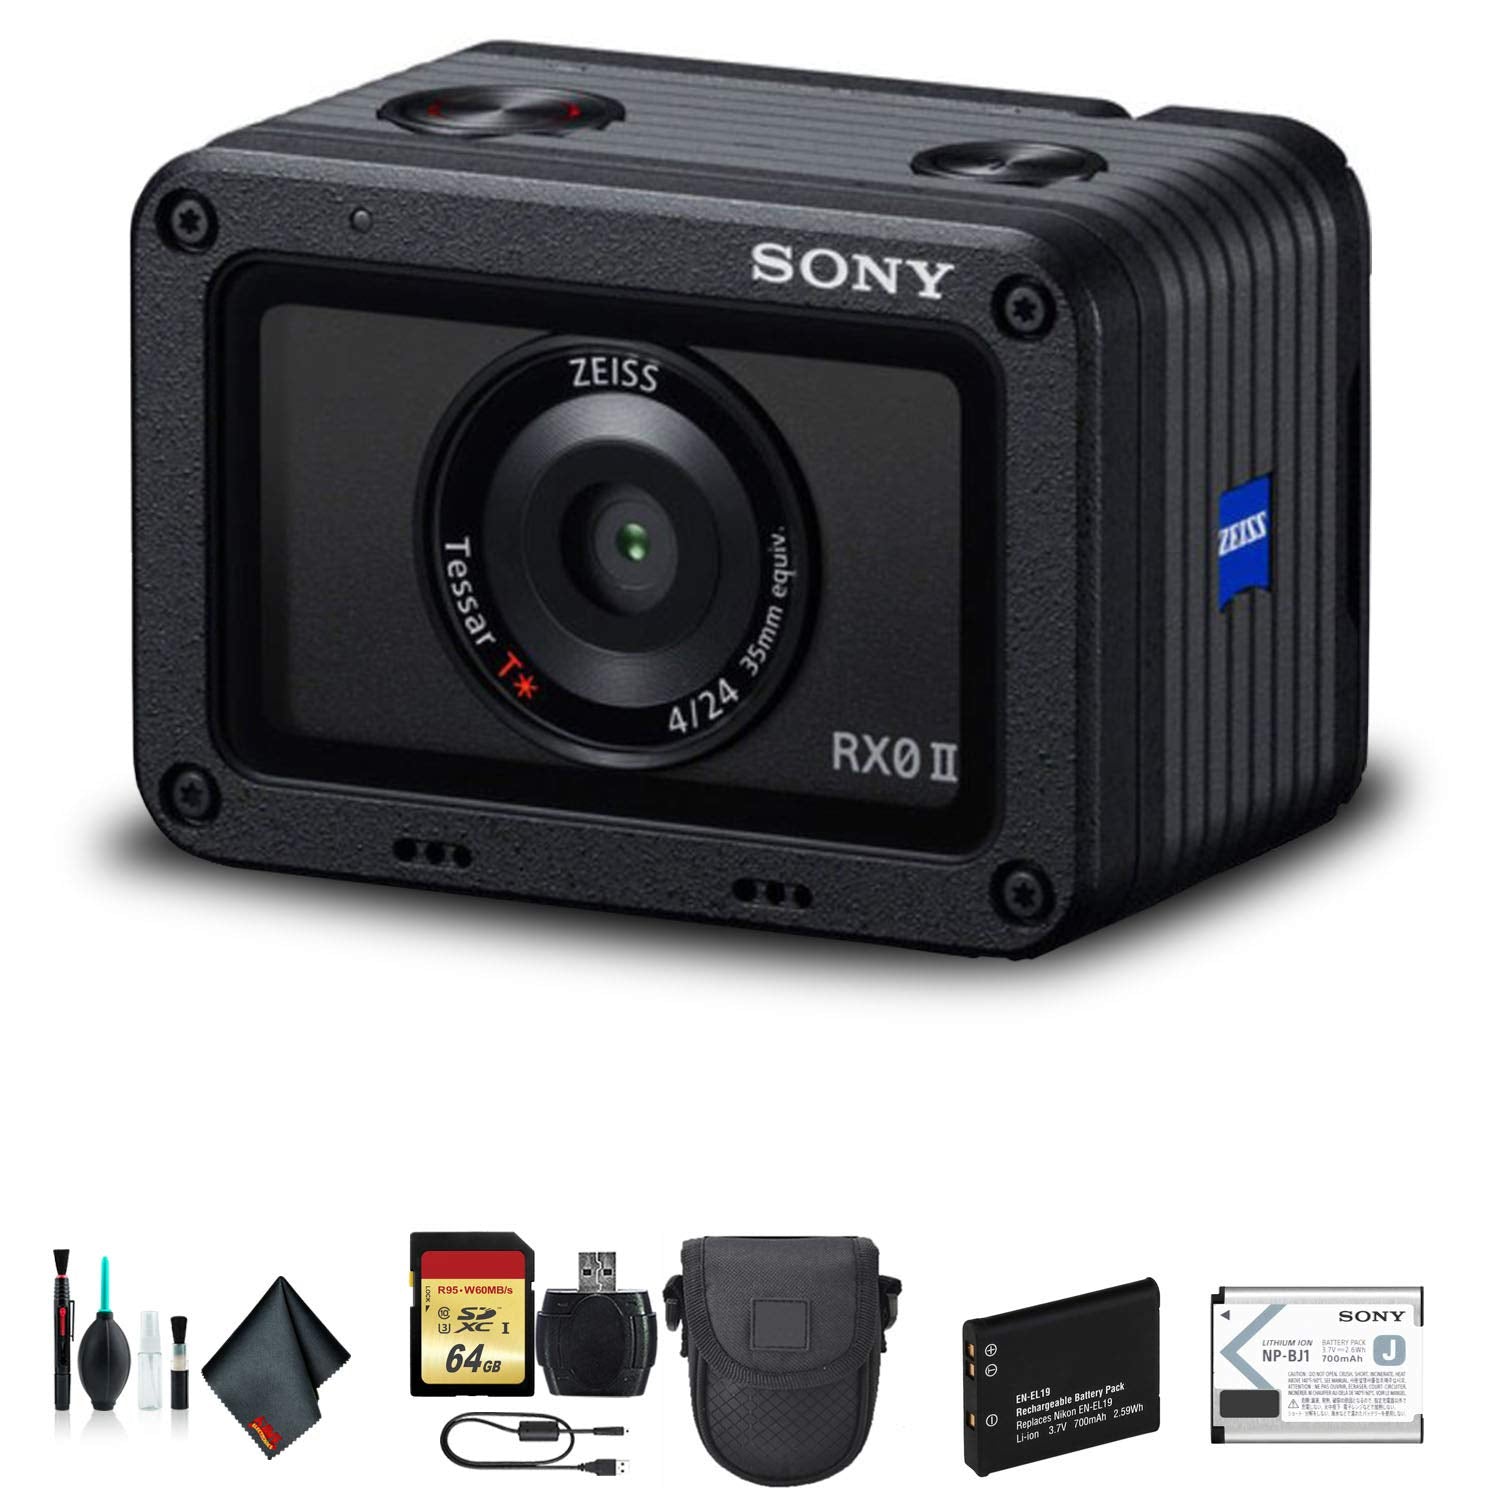 Sony Cyber-shot DSC-RX0 II Camera DSC-RX0M2 With Soft Bag, Additional Battery, 64GB Memory Card, Card Reader , Plus Essential Accessories